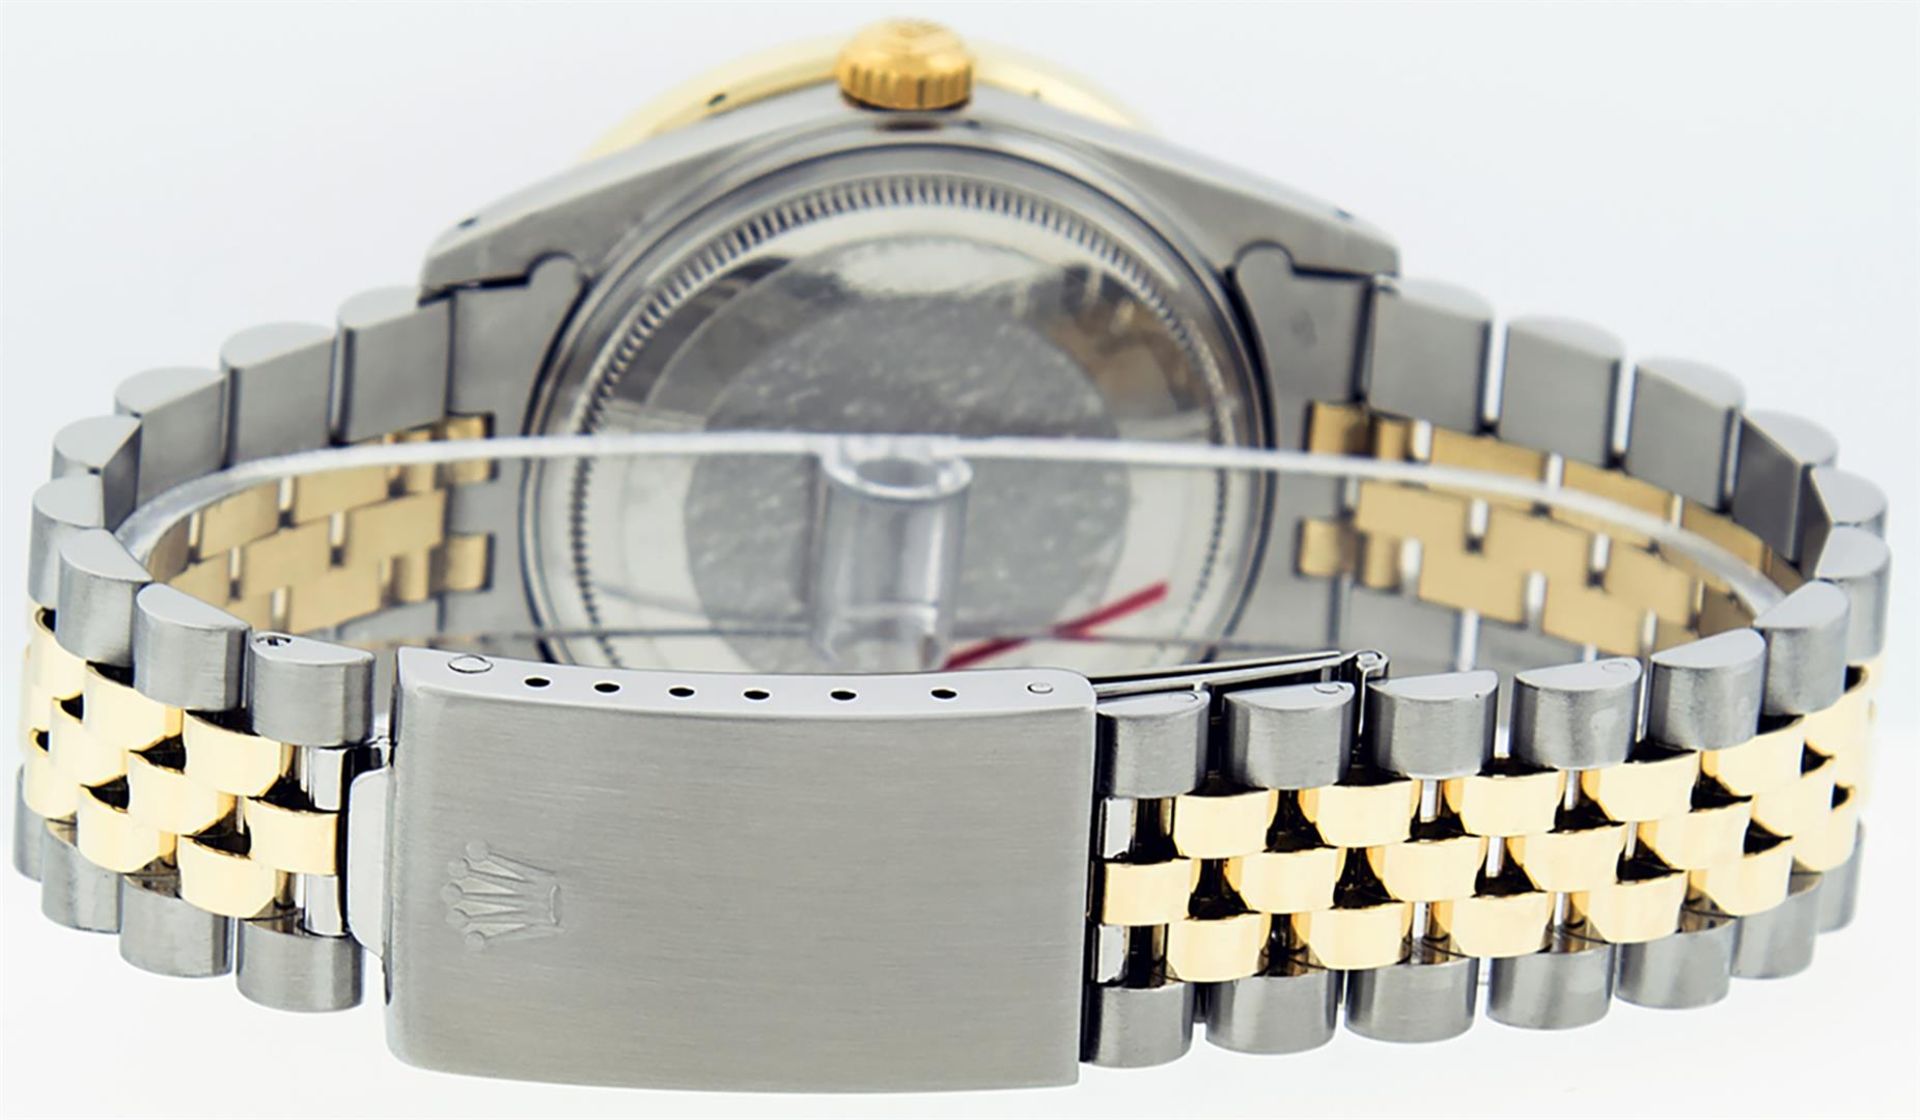 Rolex Mens 2 Tone Mother Of Pearl 3ctw Channel Set Diamond Datejust Wristwatch - Image 6 of 9